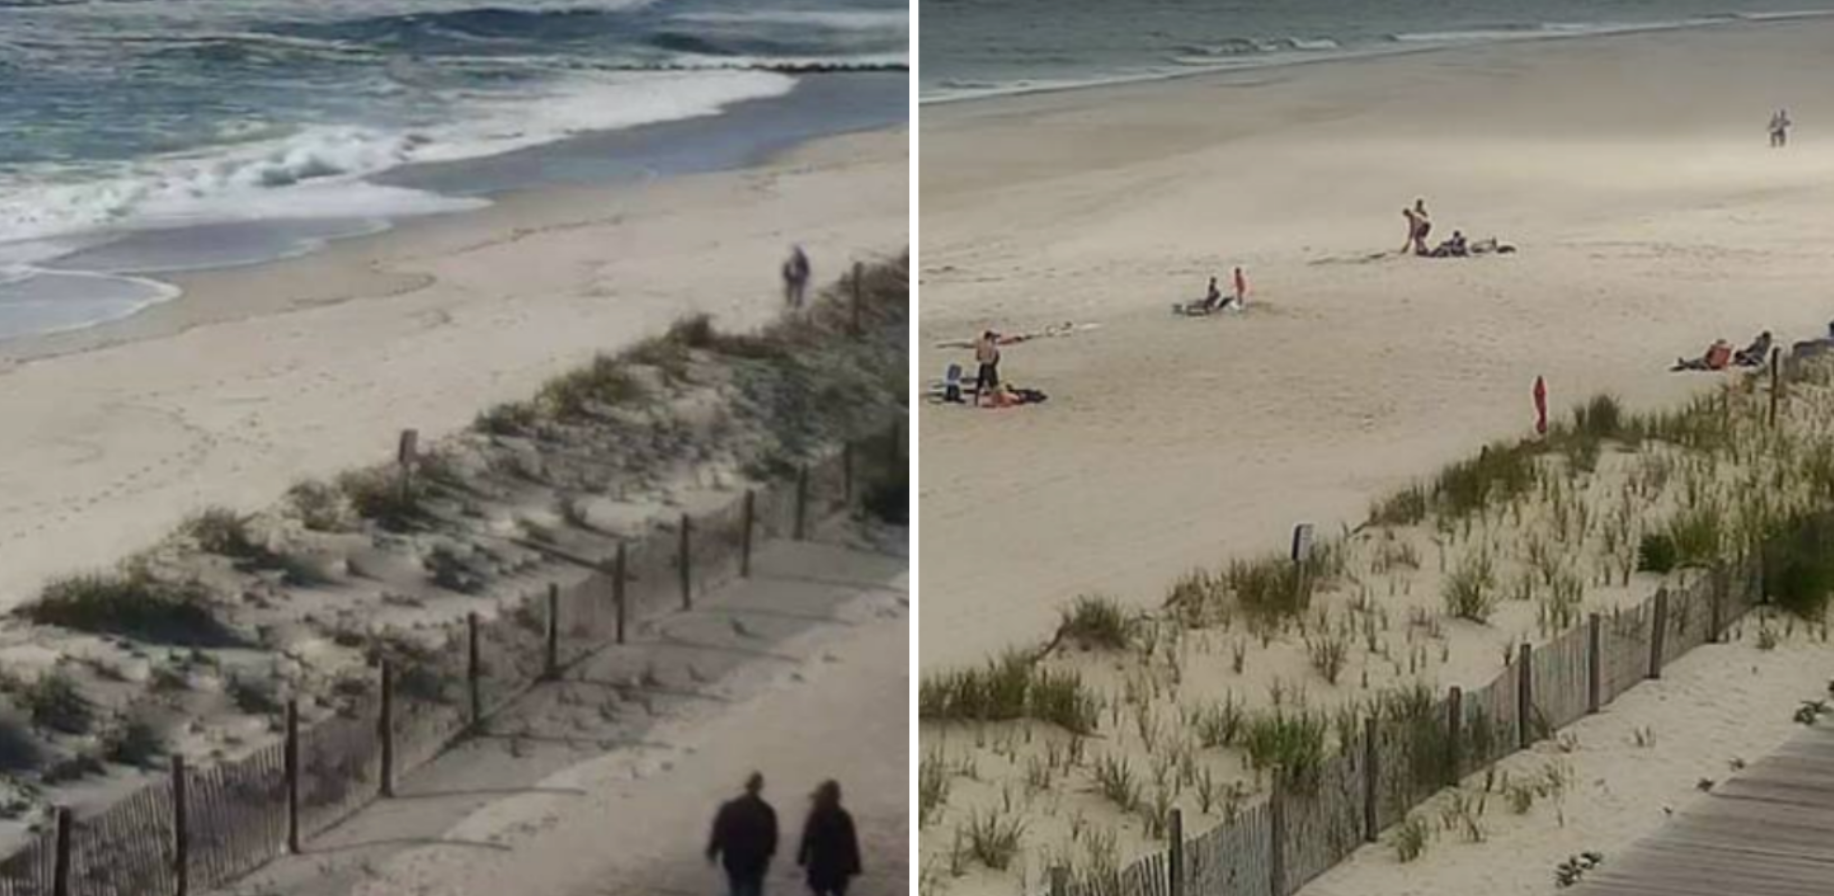  The Trenton Avenue beach in Lavallette on May 14, 2017 (l) and June 23, 2017 (r) as seen from Lavallette's Elizabeth Avenue beach camera.  